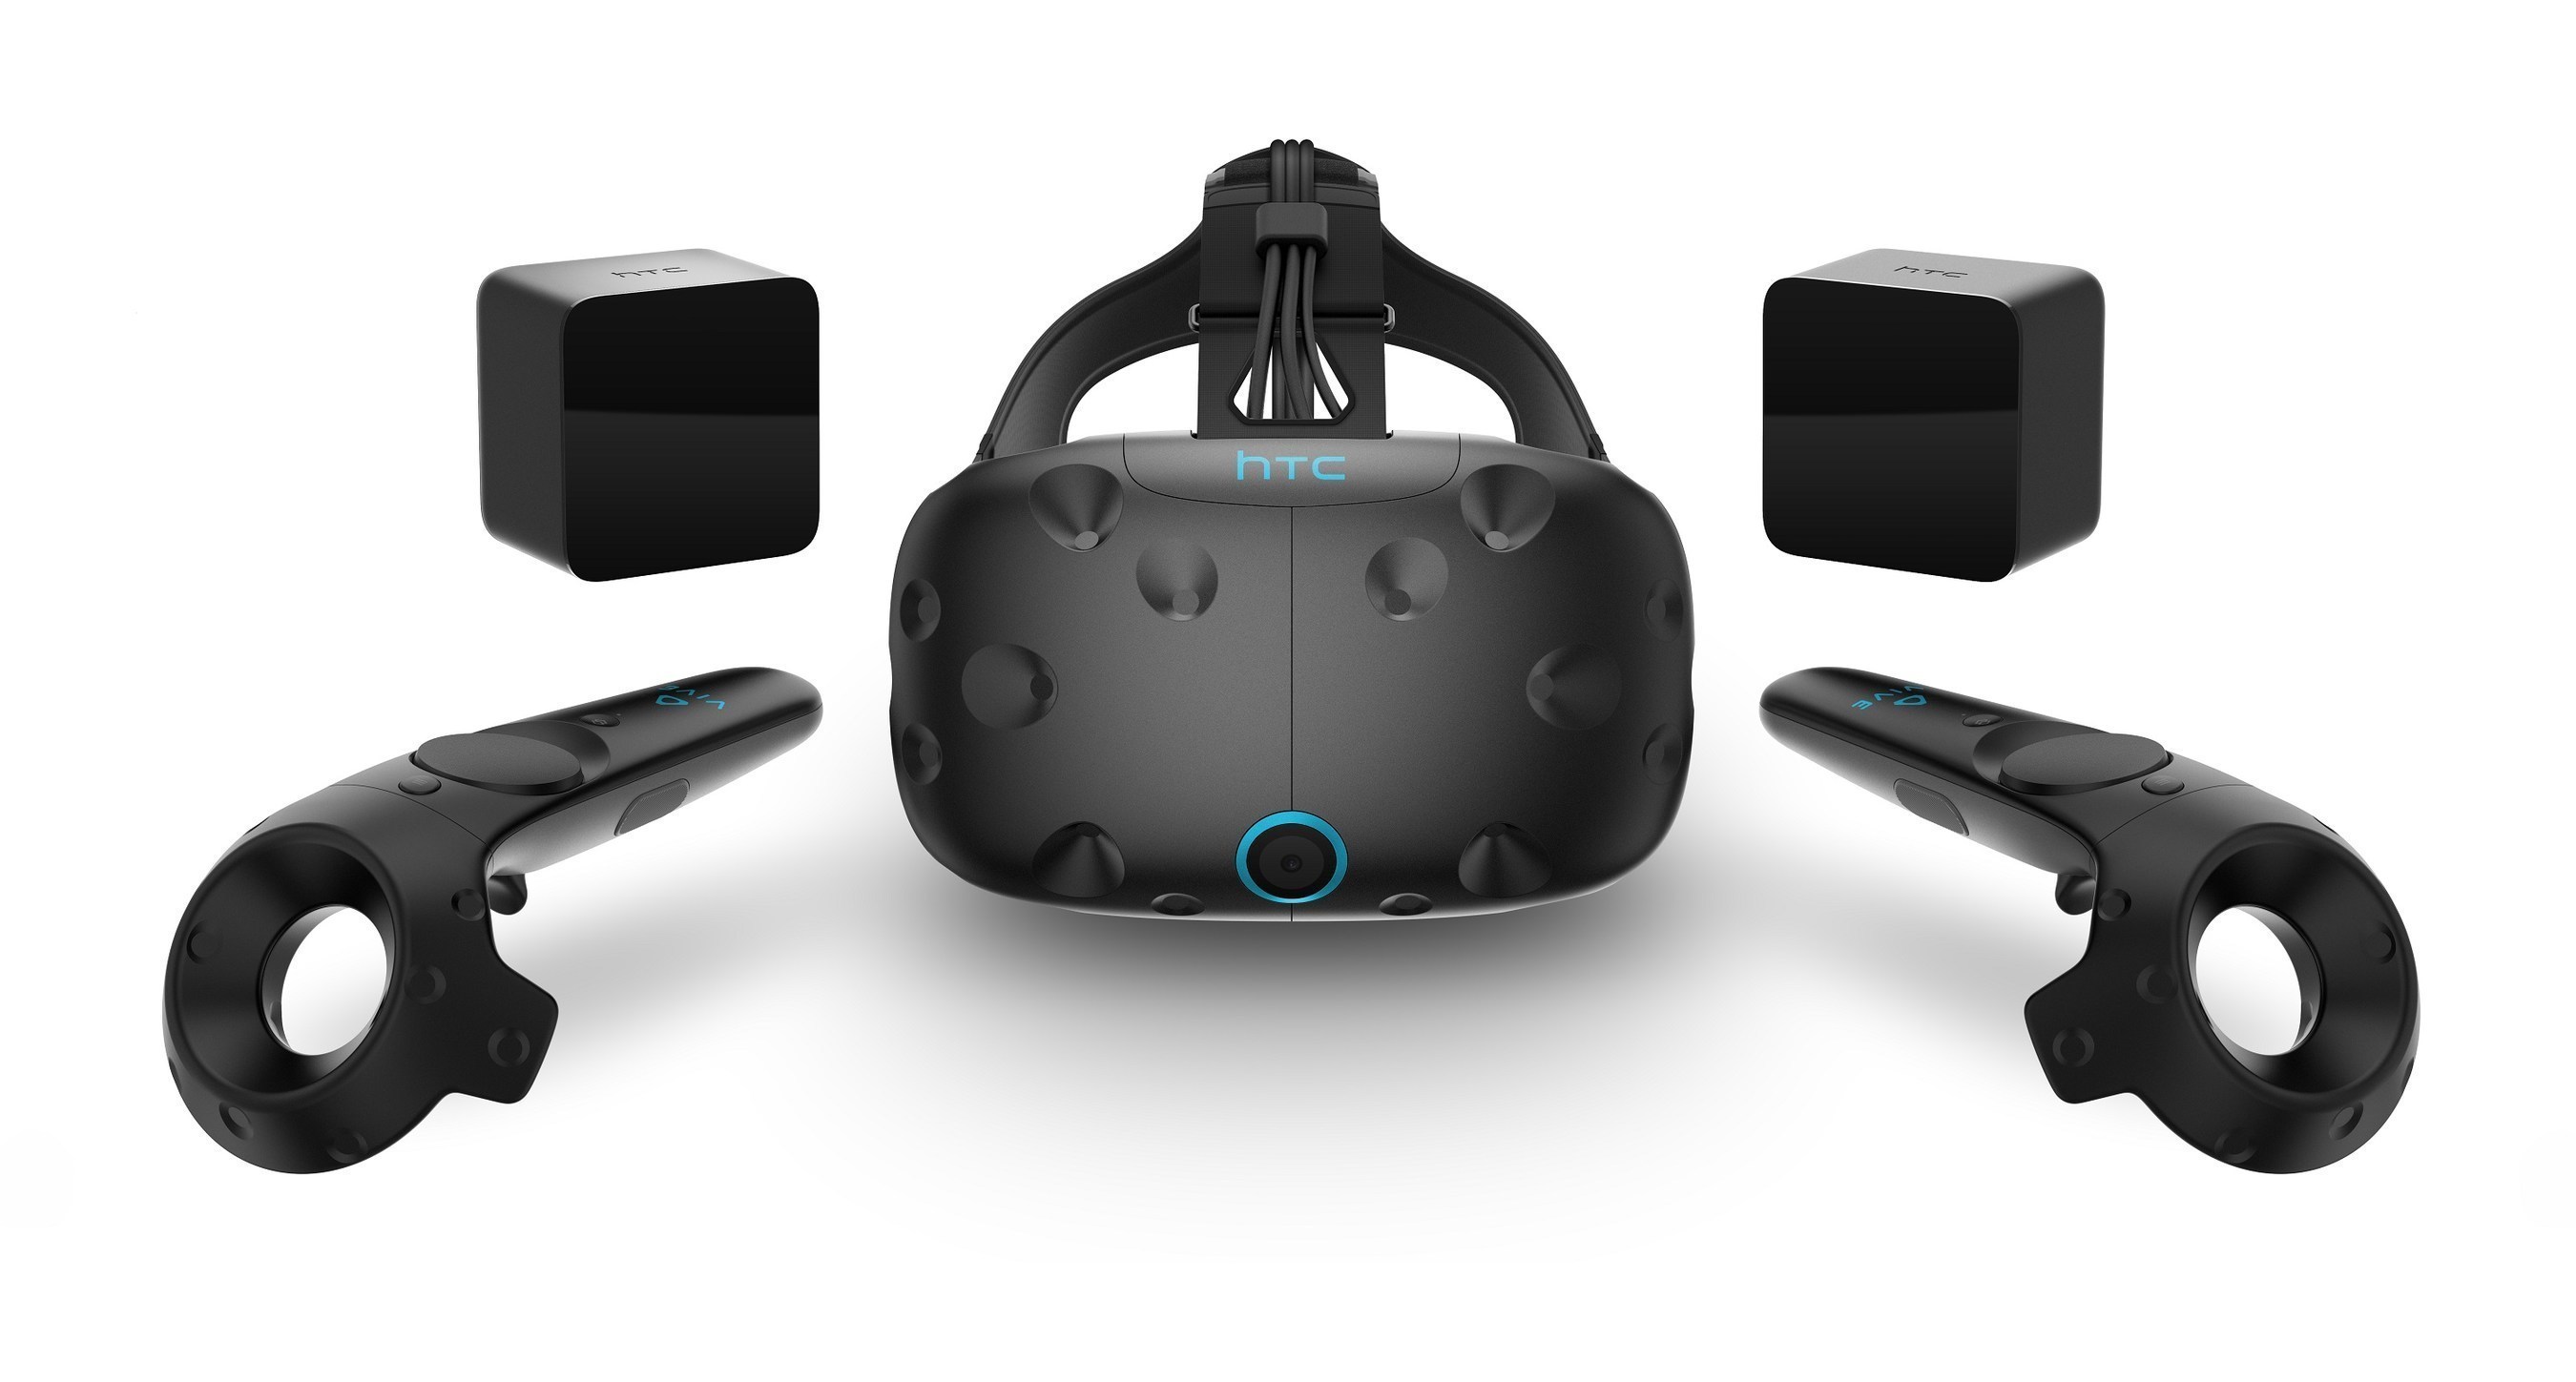 HTC Vive: The Transformation Into An Enterprise Product